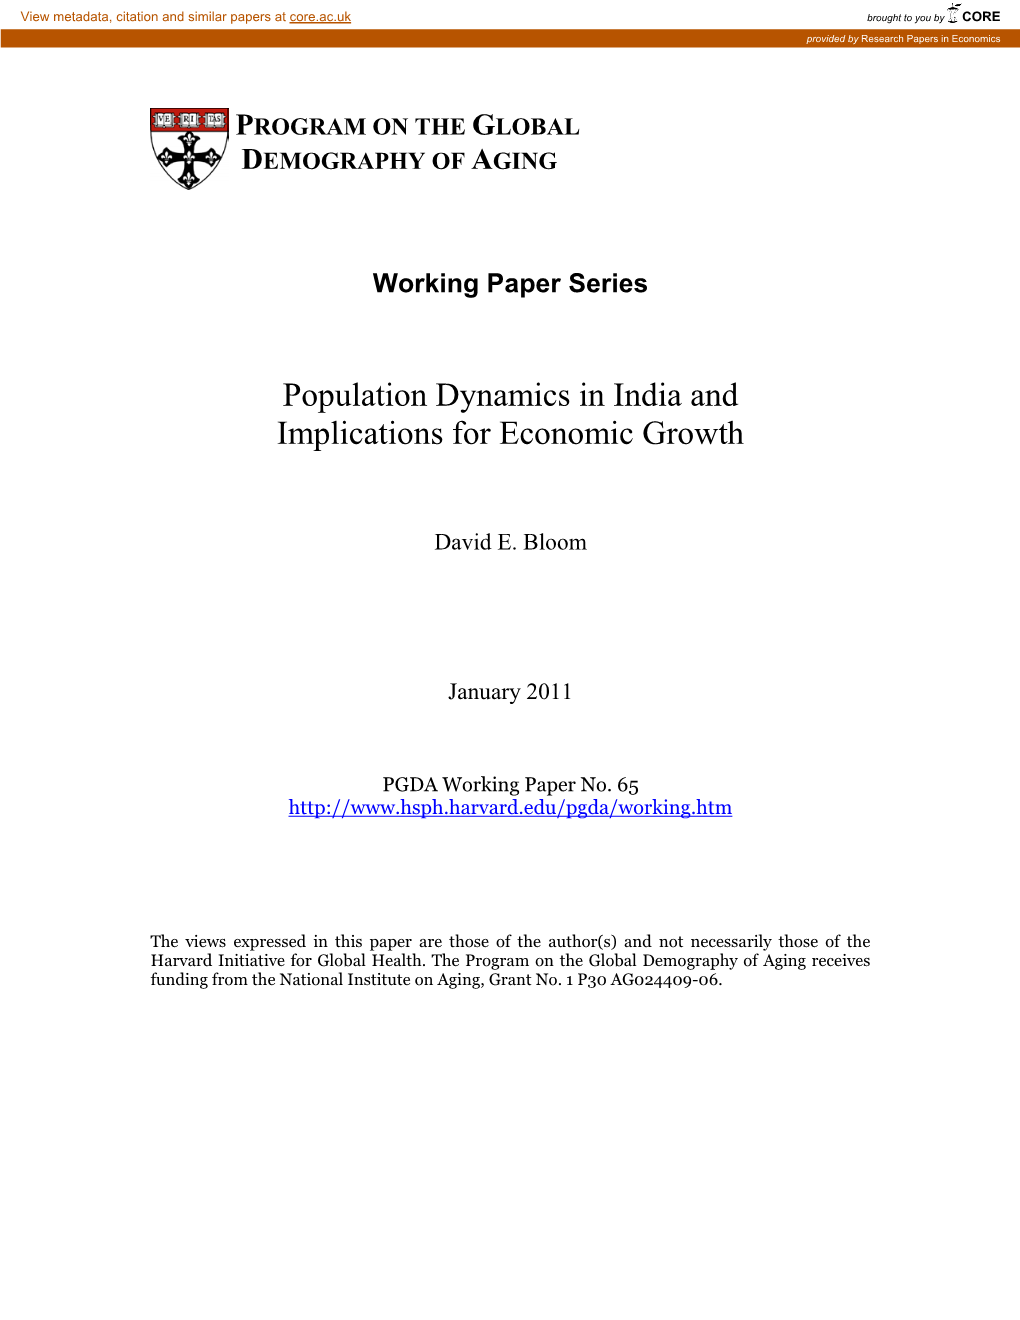 Population Dynamics in India and Implications for Economic Growth